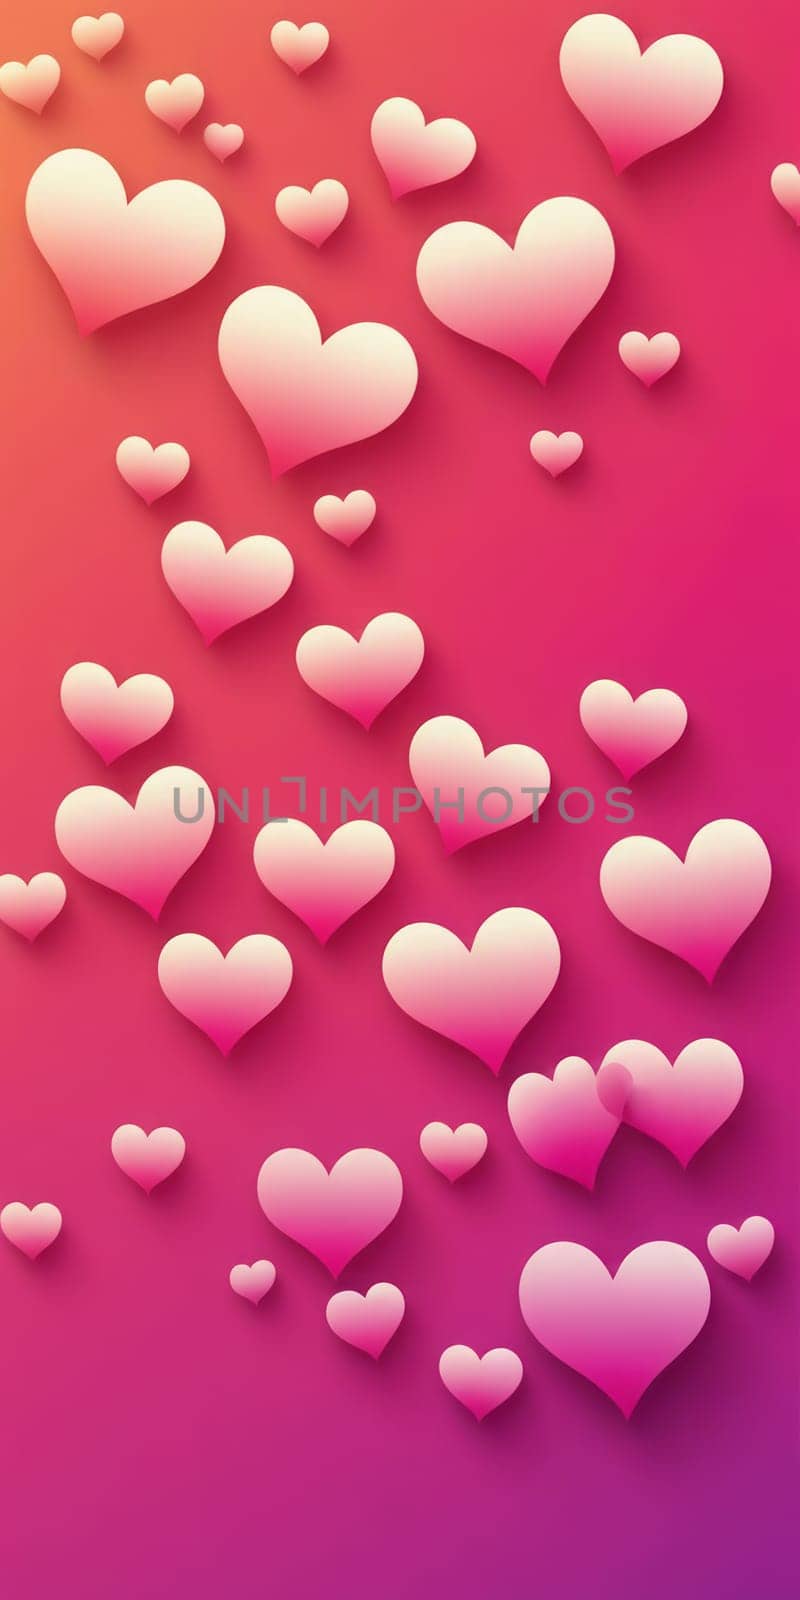 Heart Shapes in Fuchsia Bisque by nkotlyar